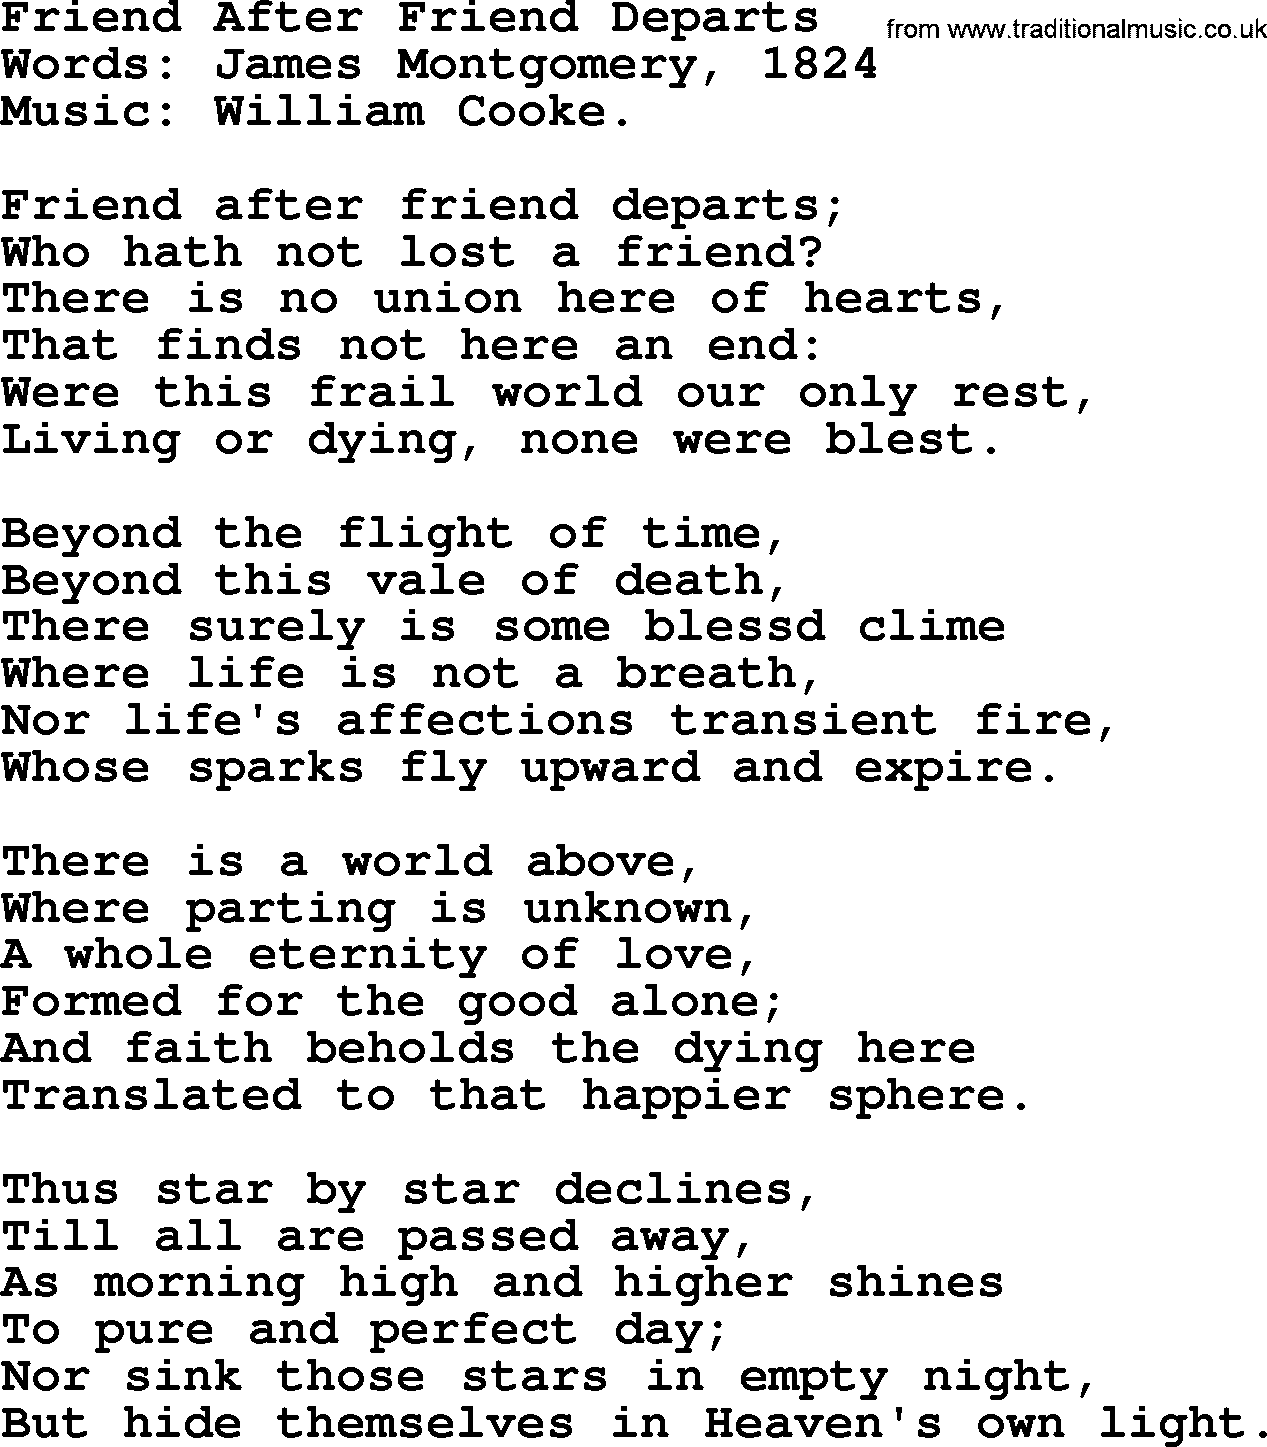 Songs and Hymns about Heaven: Friend After Friend Departs lyrics with PDF